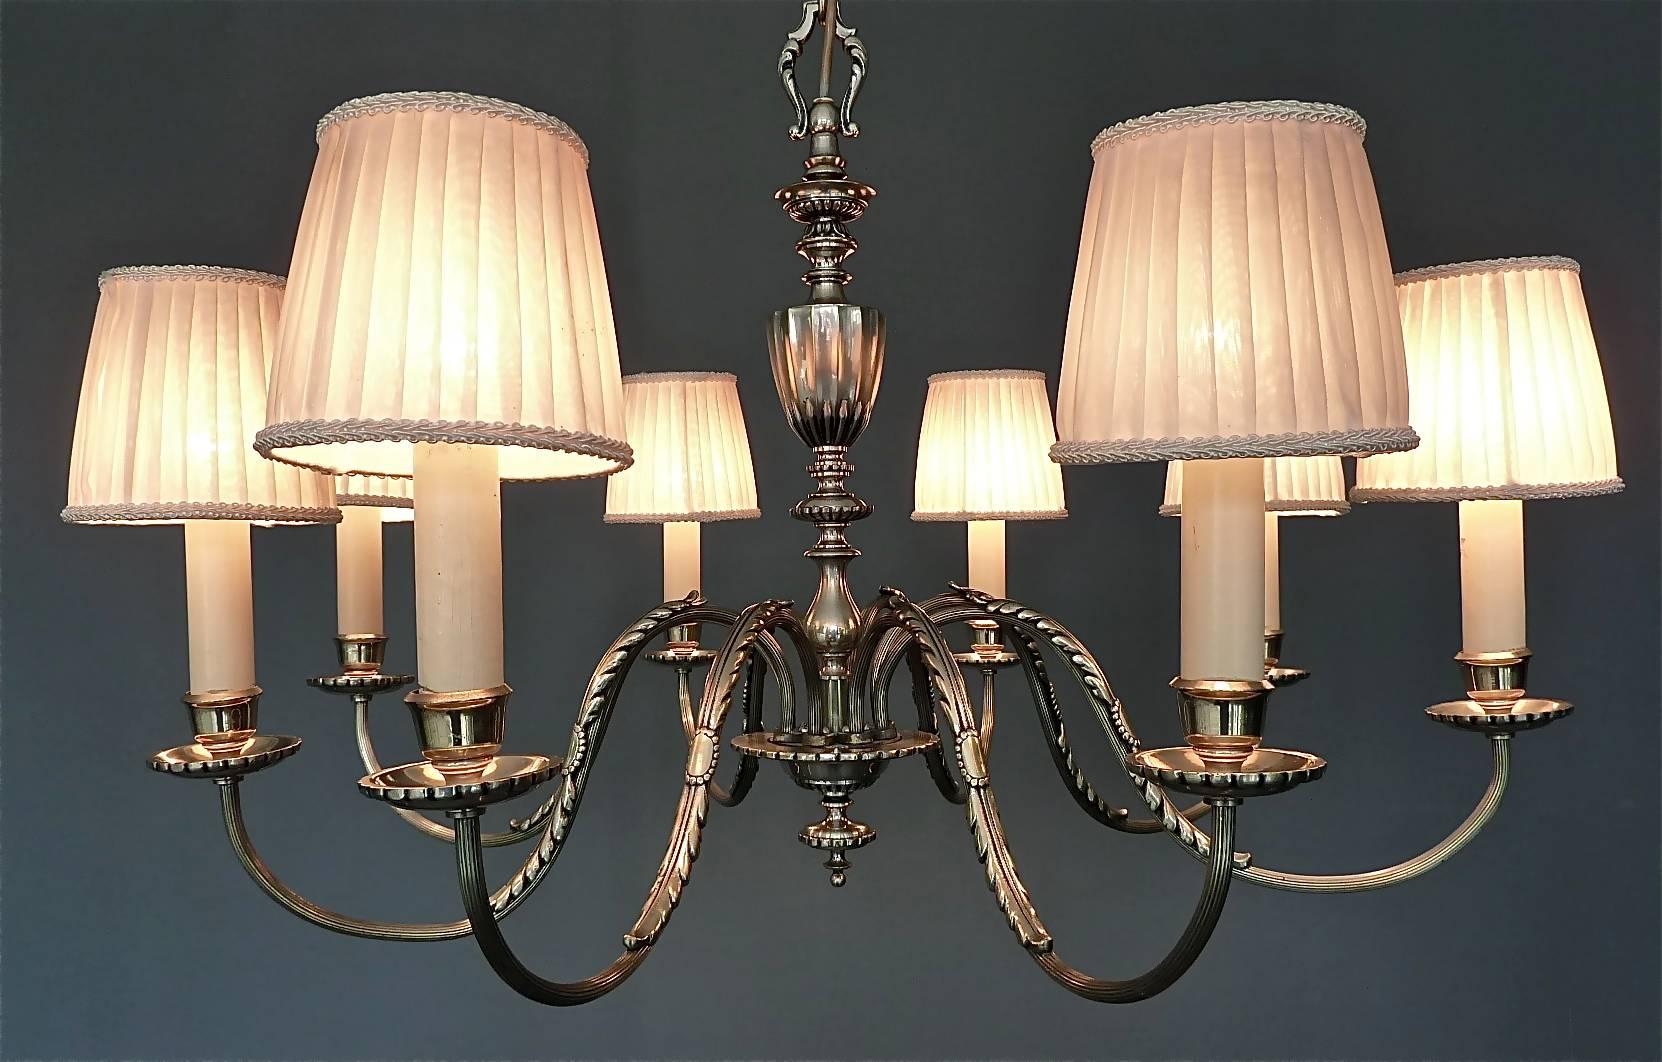 Elegant Large Empire Style Classical Silver Chandelier Eight-Light Pendant, 1920 For Sale 1